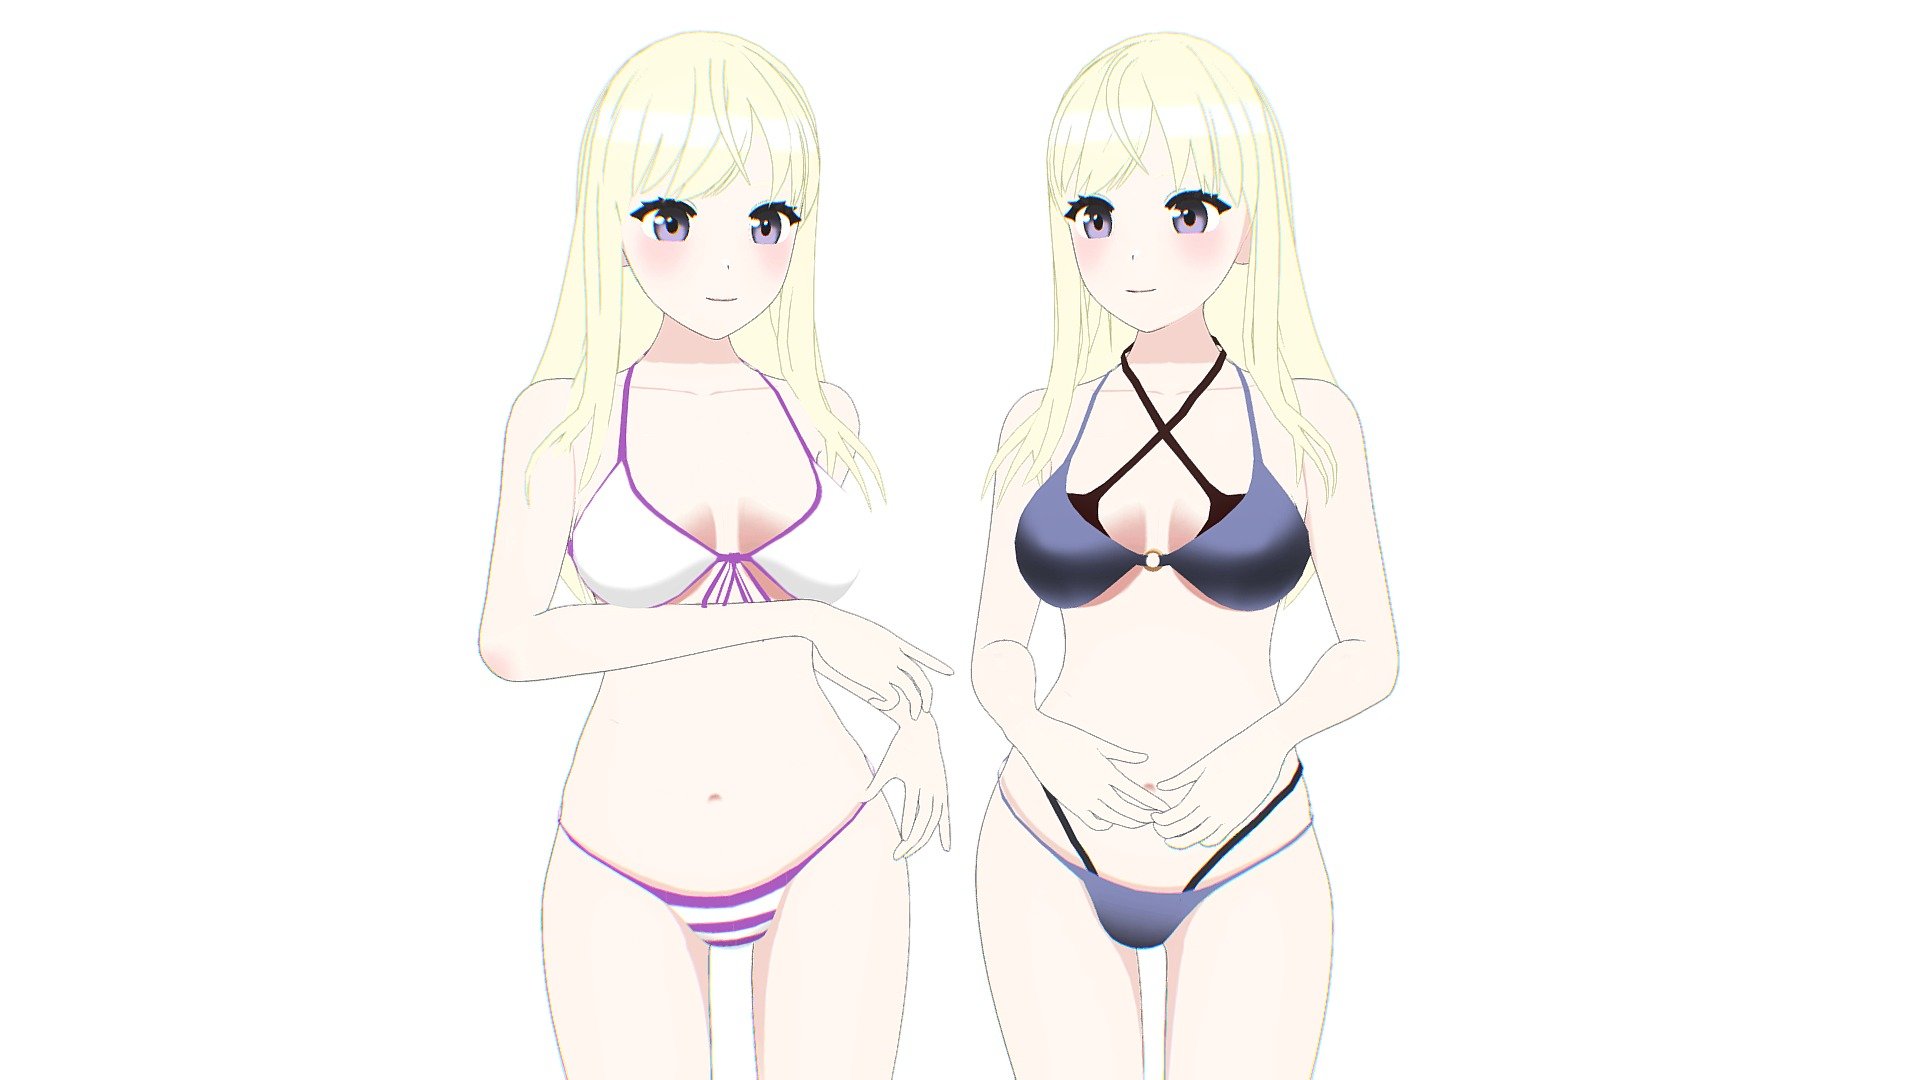 Ayame is a determined girl with her goals, but a little shy. She uses humor to deal with situations that are out of her control, which makes her super cute. Her beauty is admired by all the boys who easily fall in love.

Girls in Swimwear - pack 2 started

visit pack 2 started - 2nd girl - NEW!

Girls in Swimwear - 1st pack

🔥BUY NOW!🔥

Contains:


.Blend (Blender 3.3)
.Textures
.Rigged

VIDEO DEMO: https://youtu.be/ZedhFt9RdcY - Girls in Swimwear - Buy Royalty Free 3D model by LessaB3D (@thiagolessa90) 3d model